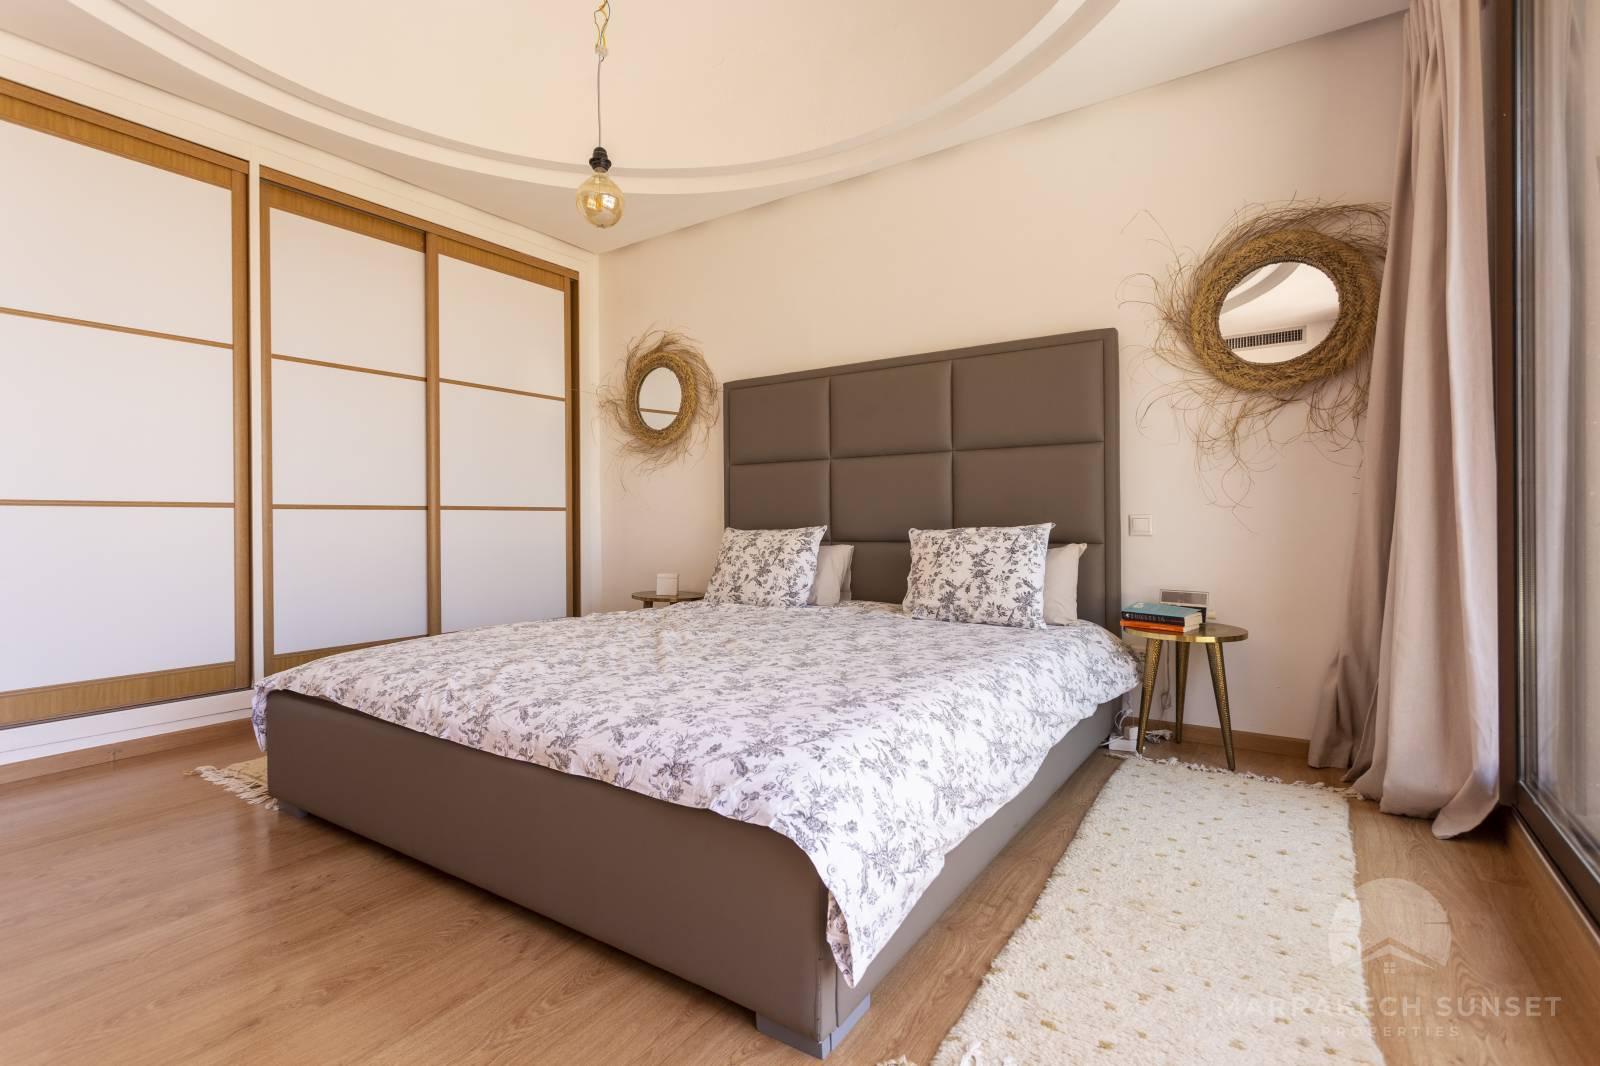 Duplex apartment for sale in Marrakech in a residential complex